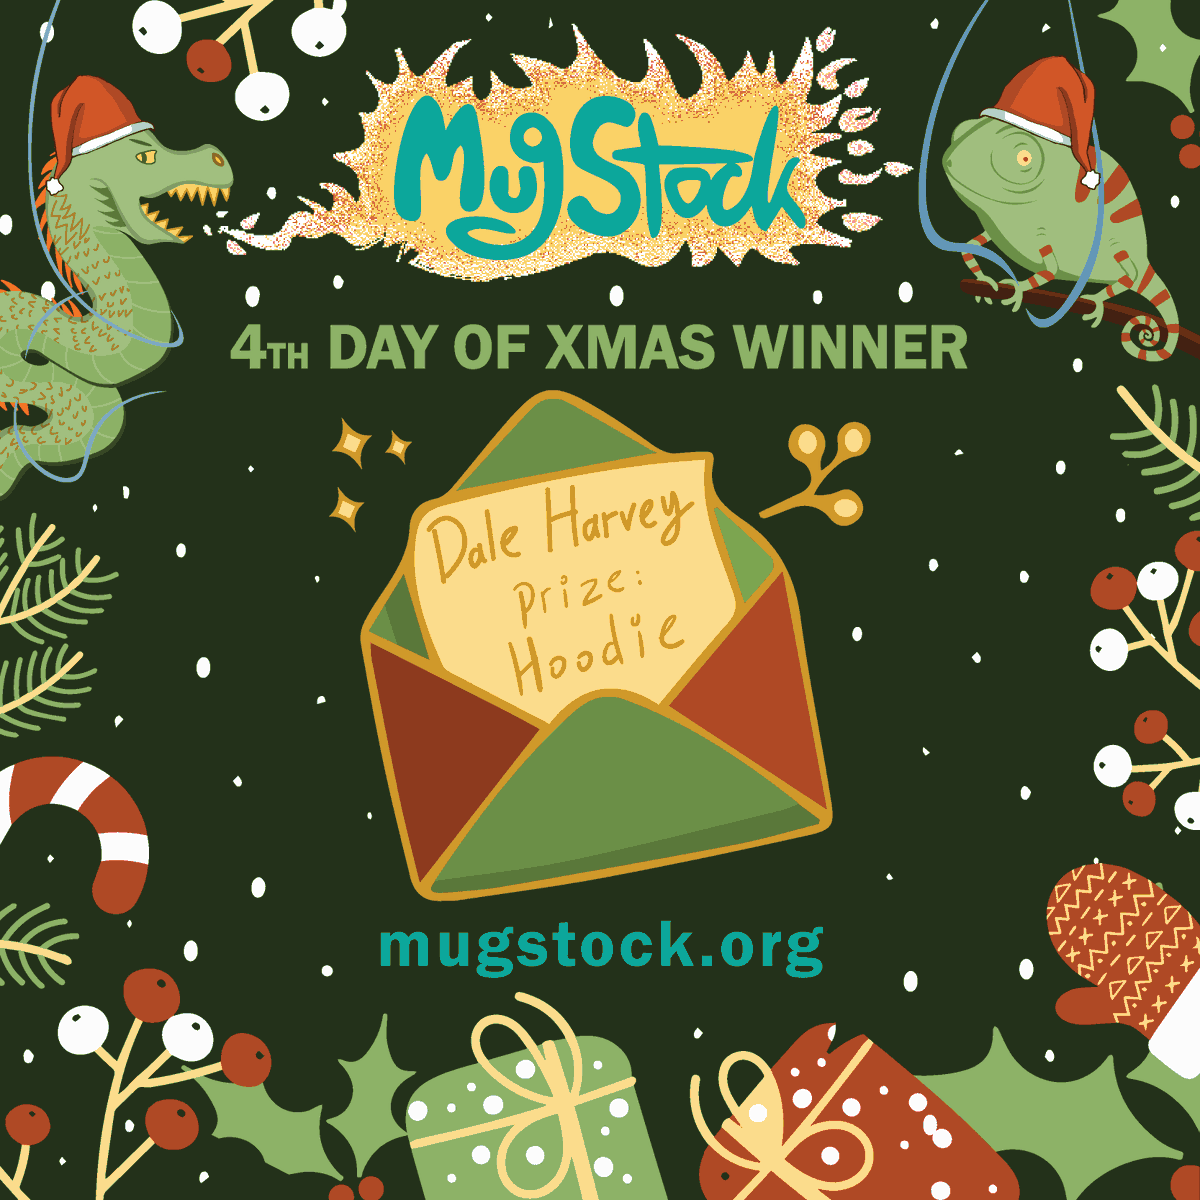 Congratulations to the 4th winner of our 12 Days of Christmas Giveaway! 🎉 There's still 8 gifts up for grabs: 🎁 2 x MugStock Hoodies 3 x MugStock T-Shirts 2 x MugStock Mugs 1 x Pair of Adult Weekend Tickets So get your tickets to be entered 🎟️ mugstock.org/tickets/